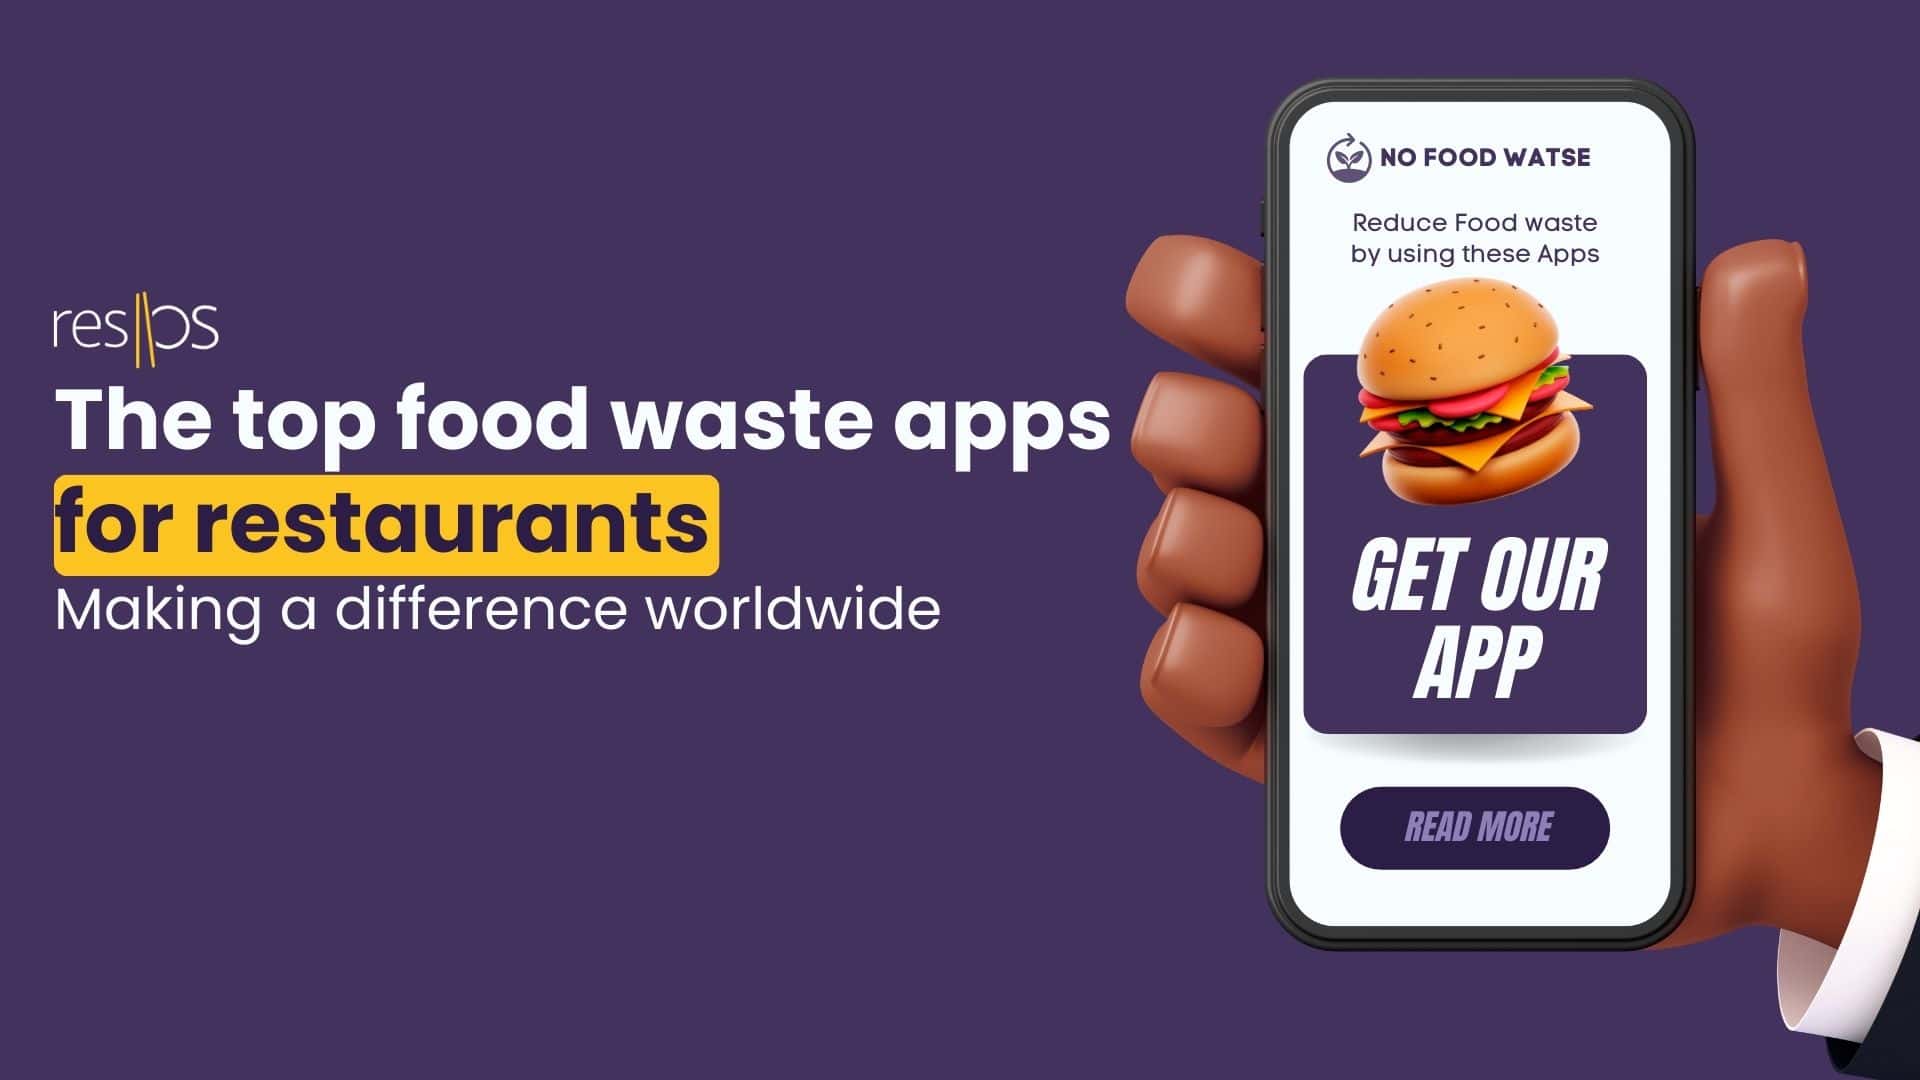 The top food waste apps for restaurants